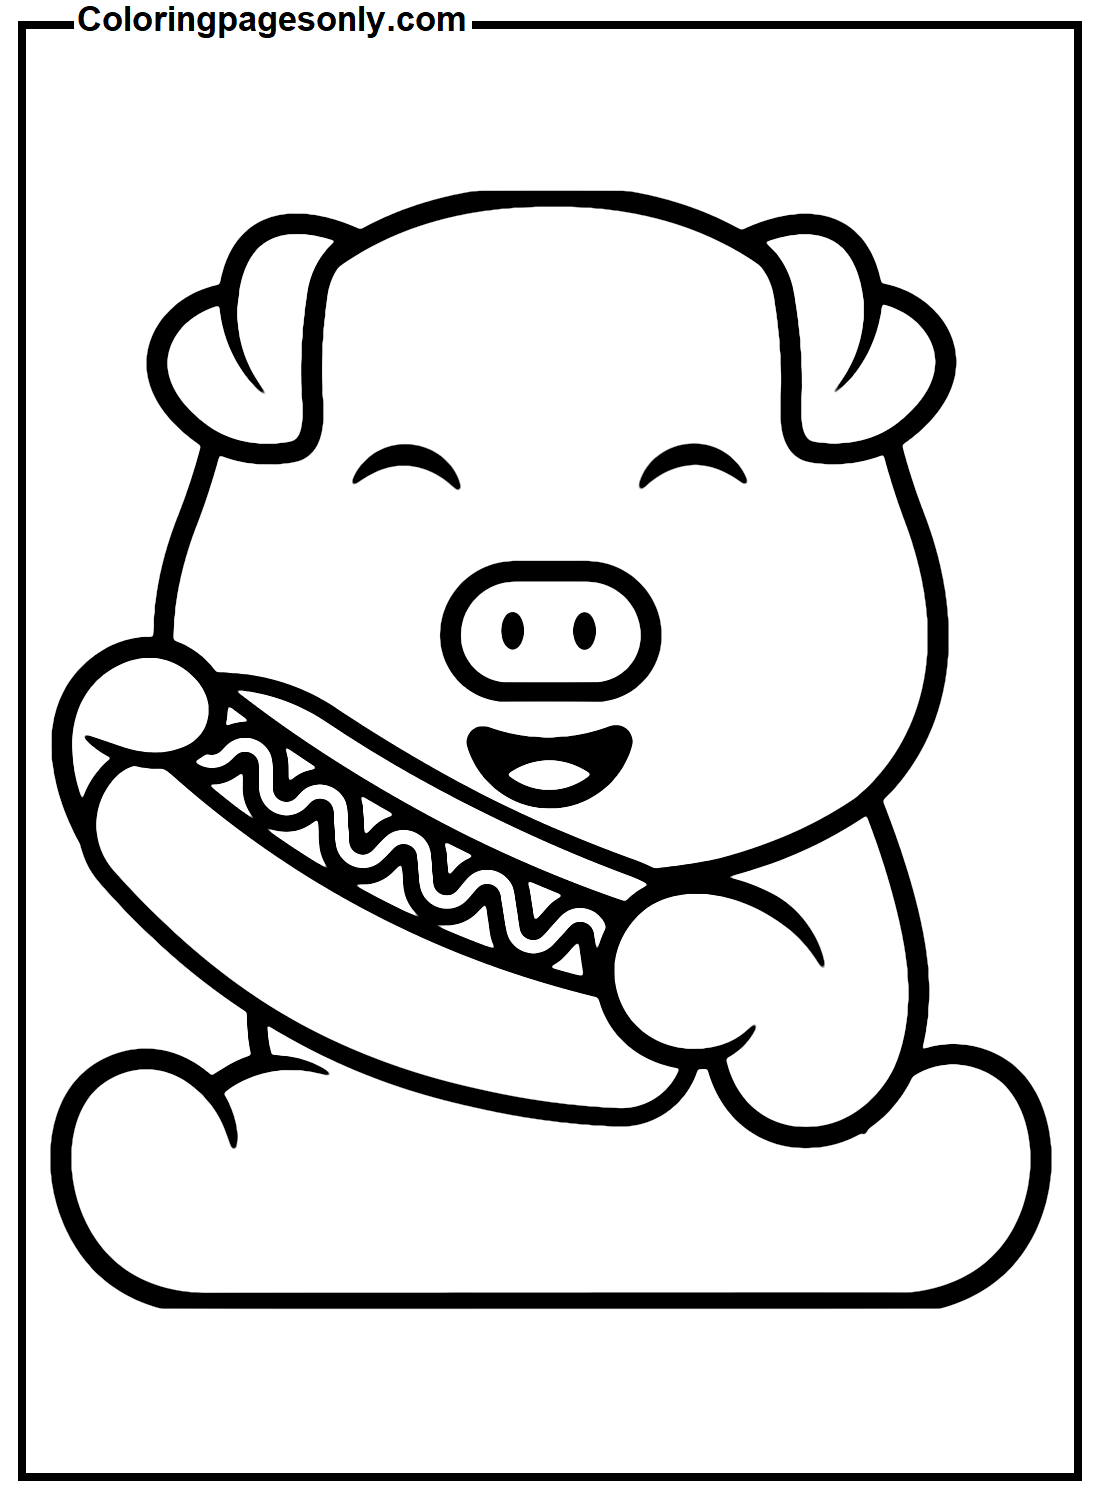 Pig Holding Hot Dog Coloring Pages